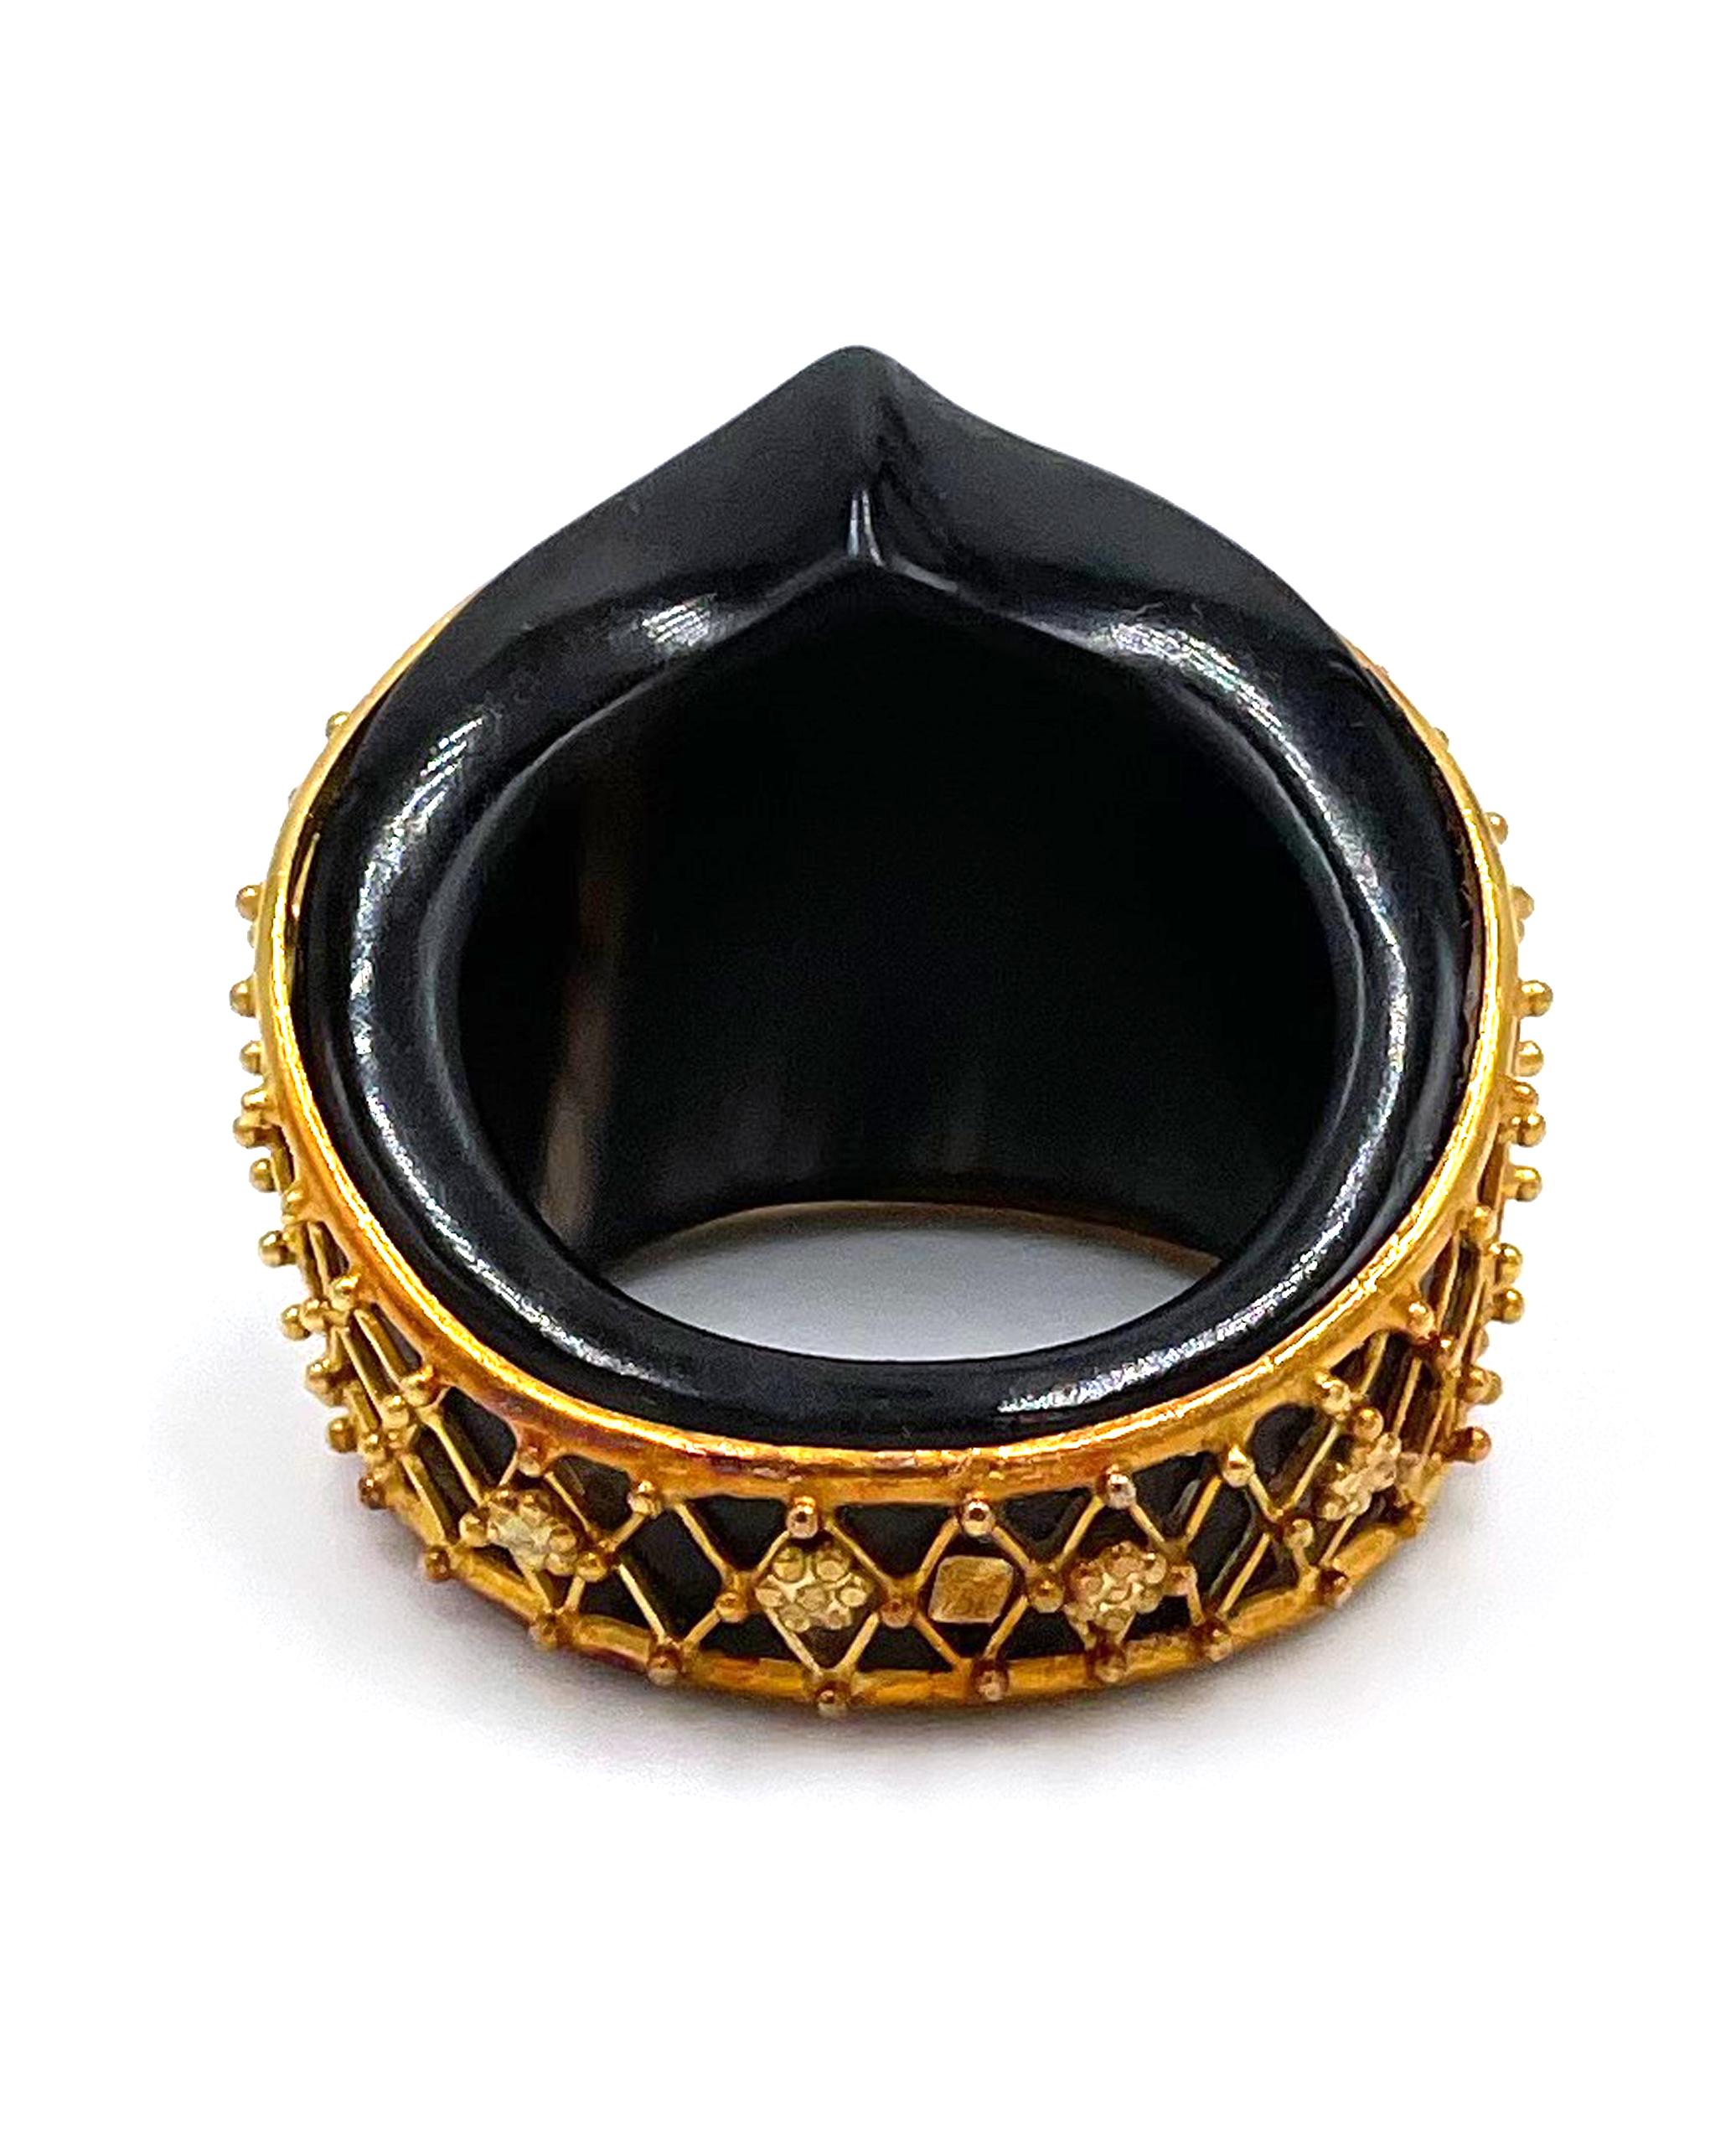 Ilias Lalaounis Black Glass Ring with 18K Yellow Gold Netting Detail In Good Condition For Sale In Old Tappan, NJ